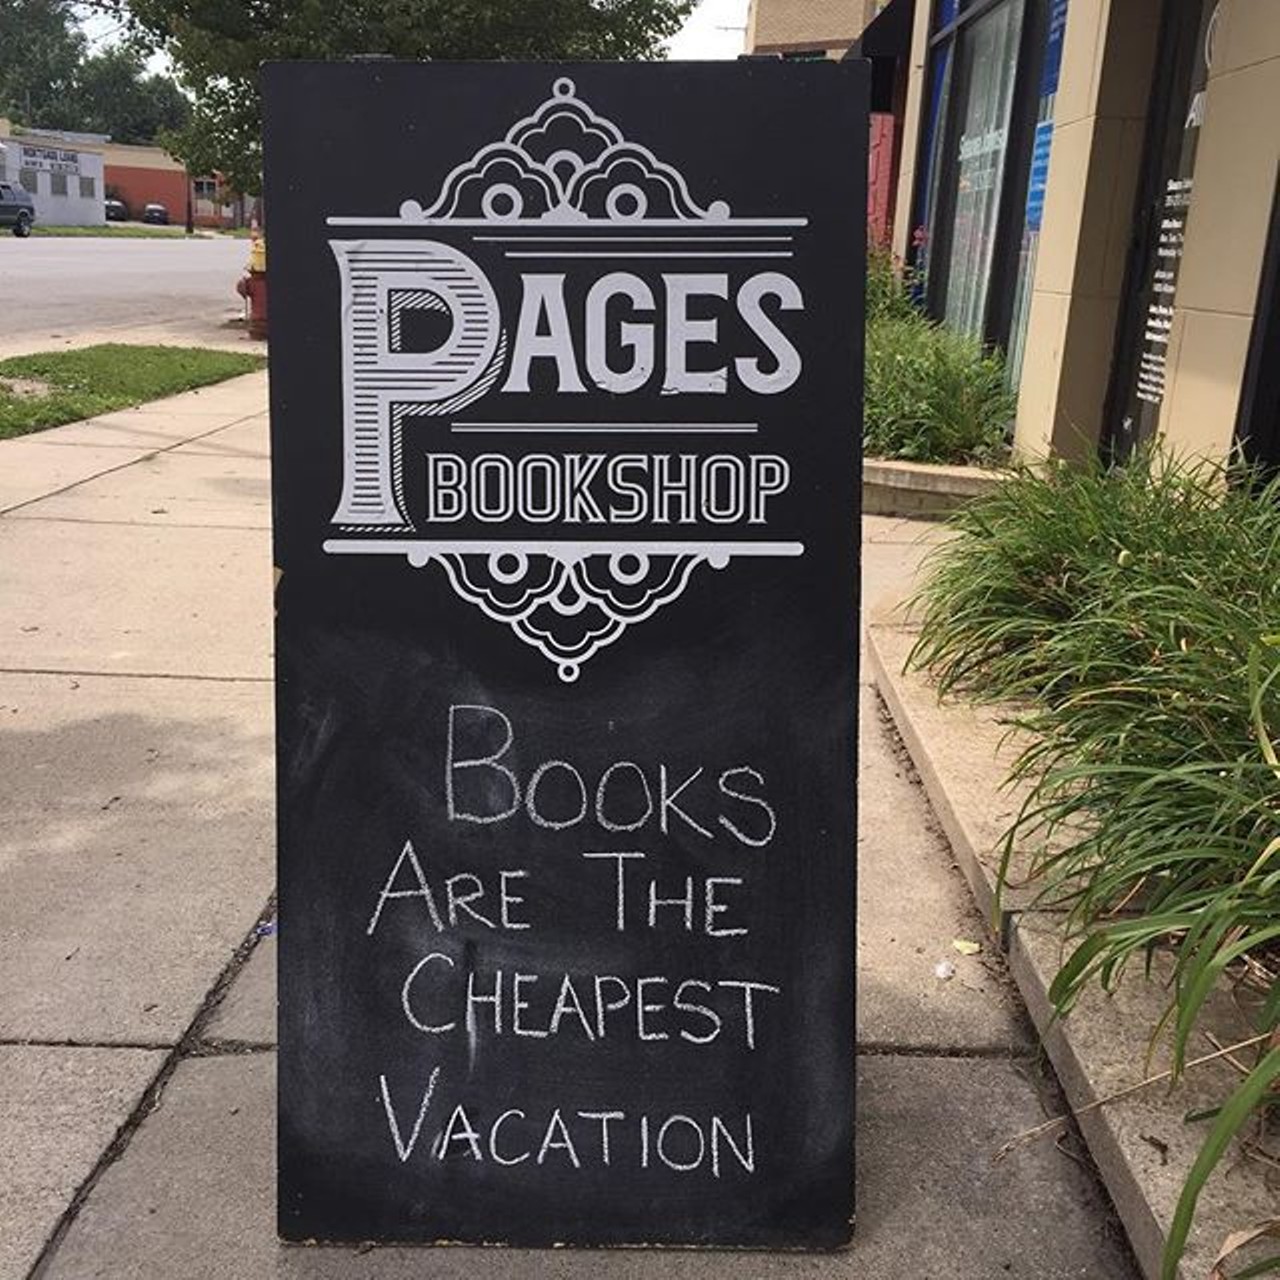 Pages
Detroit&#146;s newest indie bookstore, Pages opened in Grandmont-Rosedale with a vision of being more than just a place to buy books. Their &#147;highly curated&#148; selection of books bridges genres and subjects, with a section dedicated to books from and about Detroit, but where Pages really stands out is as a community meeting place. Frequent events, including author signings and book discussion groups, bring residents and visitors together for conversation and camaraderie in the tradition of the best bookstores and cafes of the past. 19560 Grand River, Detroit.(Photo Credit: pagesontheave on Instagram)